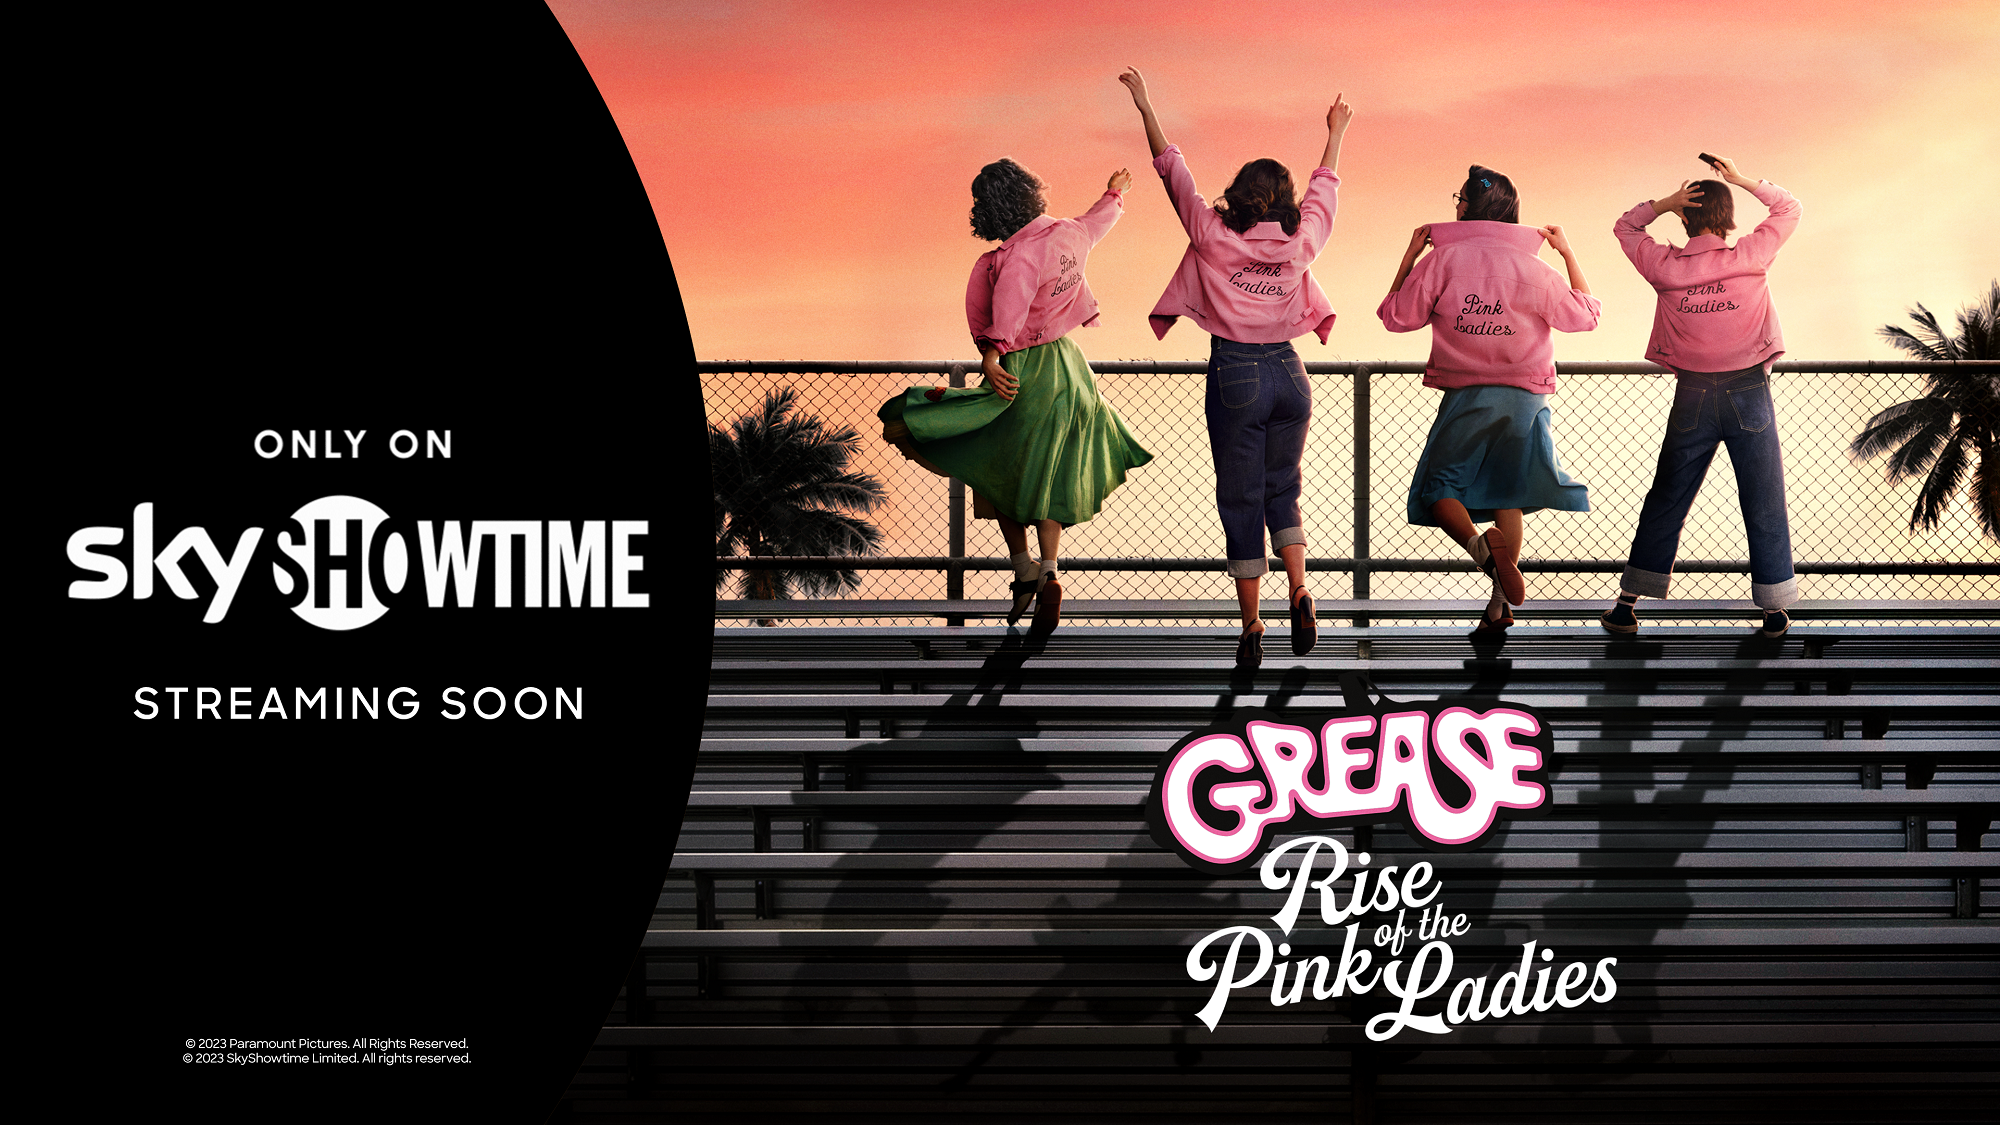 sst_grease_rise_of_pink_ladies_sst_16x9_3840x2160.png